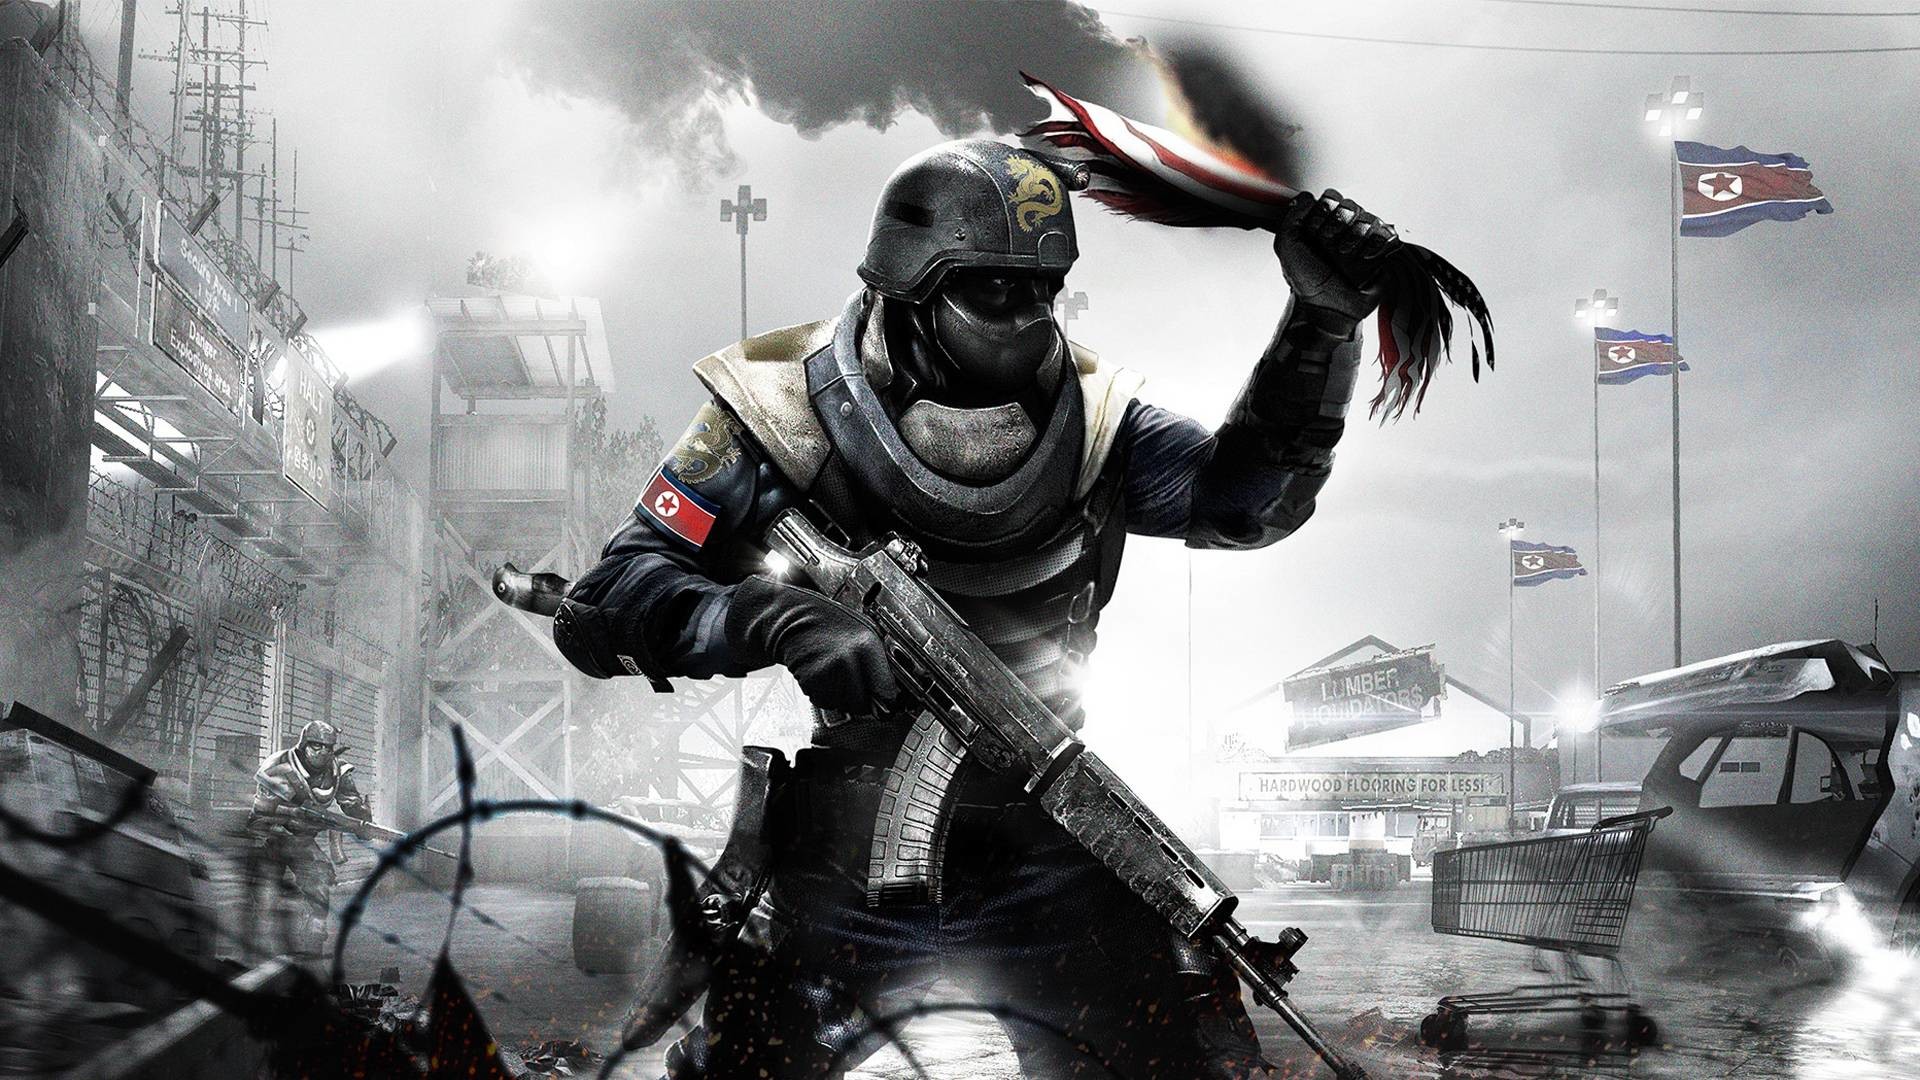 1920x1080 Homefront Wallpapers in full 1080P HD Â« GamingBolt.com: Video Game ... Awesome  GamesBest ...